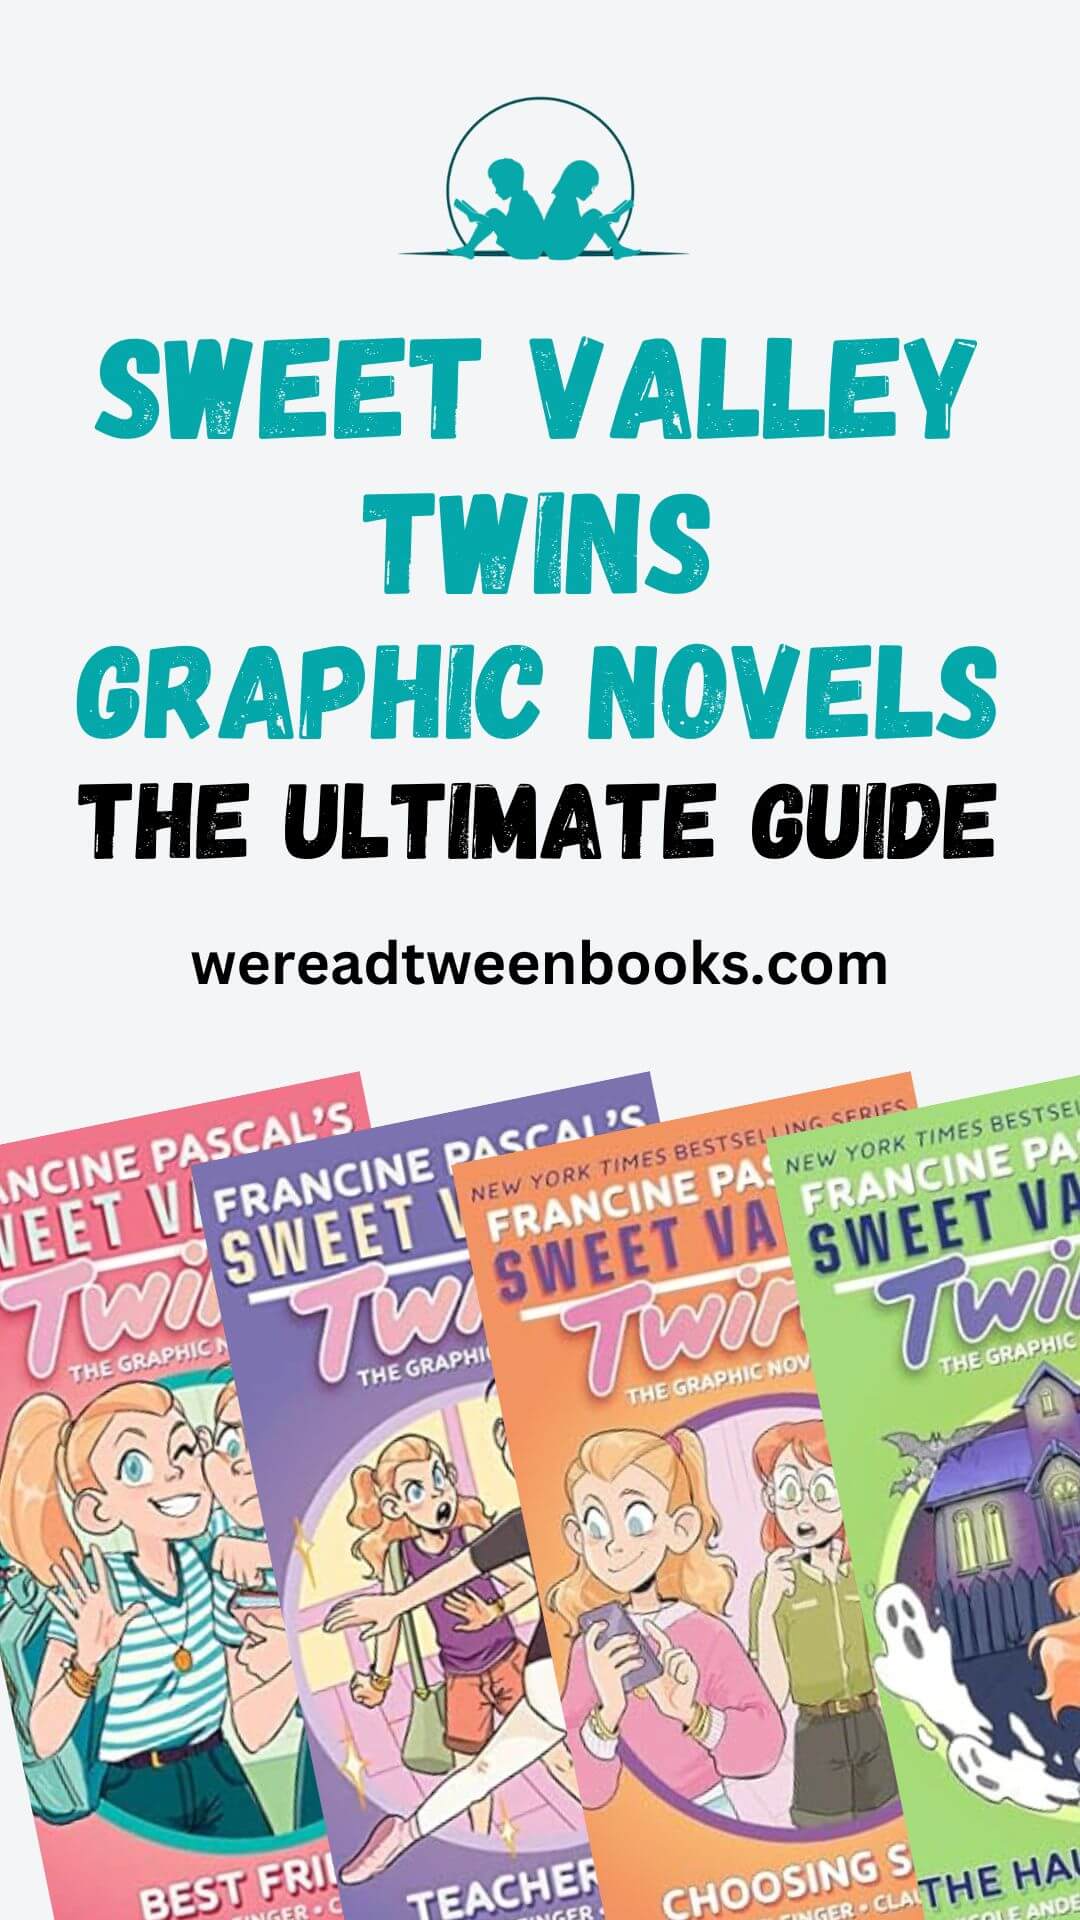 Discover all the Sweet Valley Twins graphic novels in this complete guide from book bloggers, We Read Tween Books.